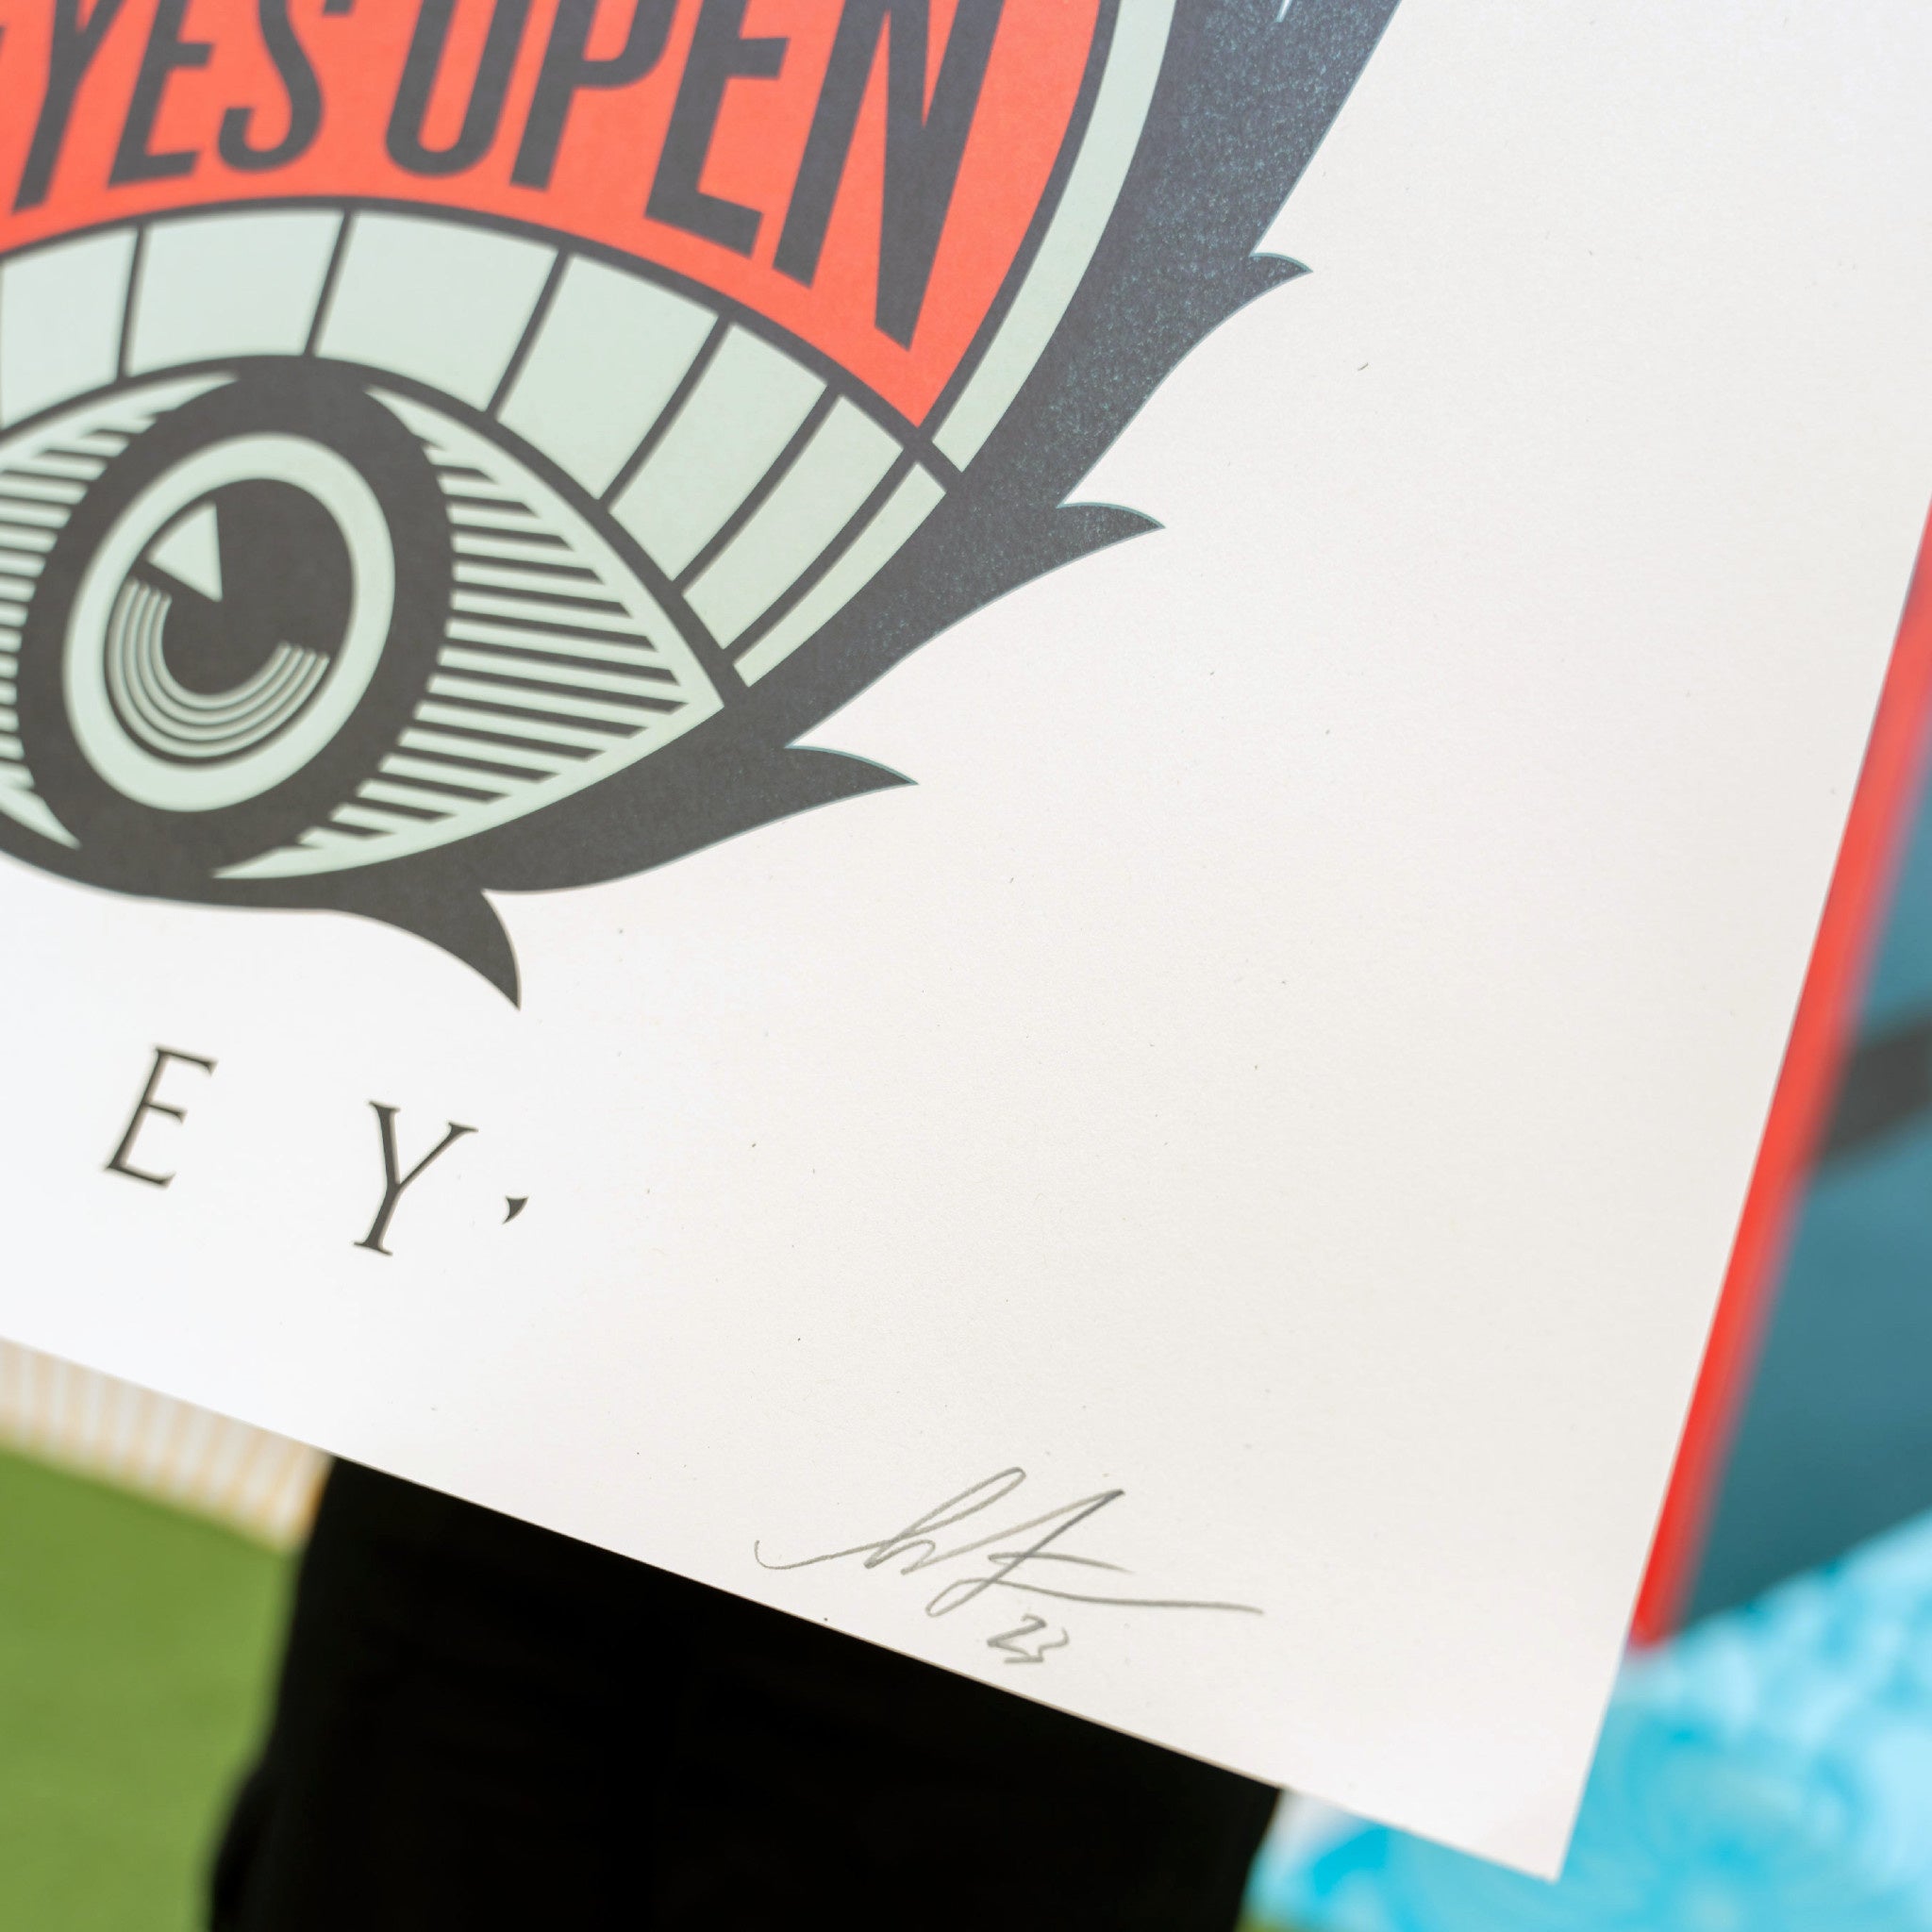 Shepard Fairy Eyes Open Fairey Signed Offset Lithograph - Wynwood Walls Shop